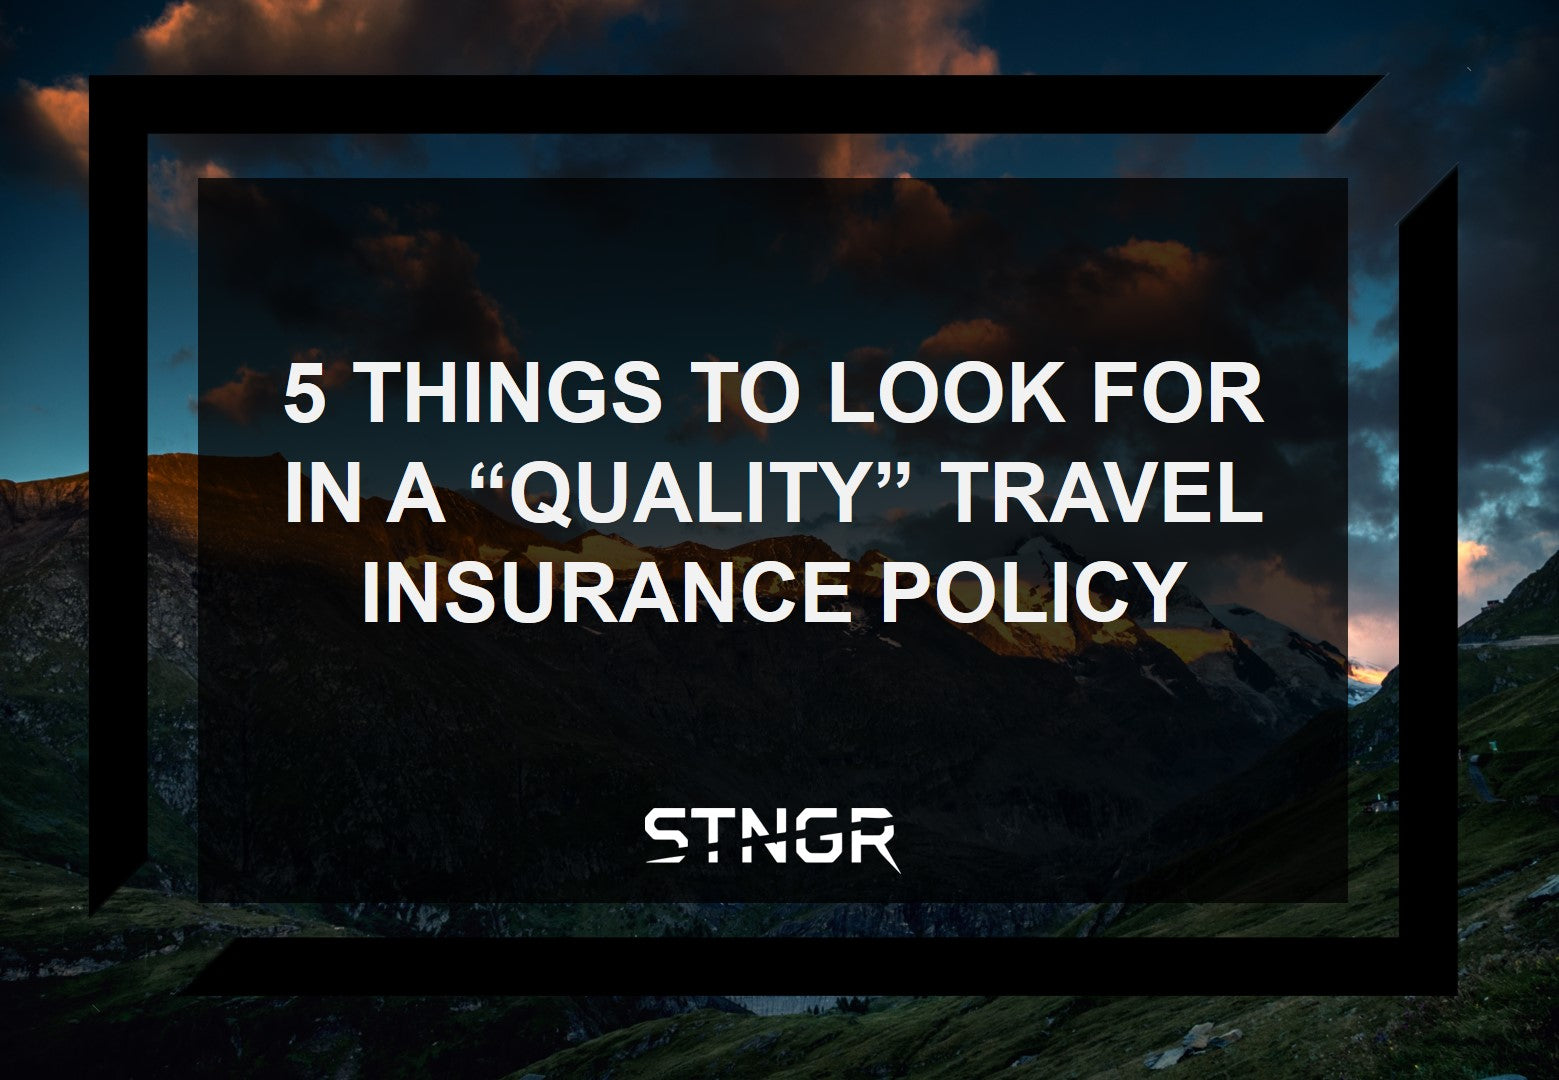 5 Things to Look For in a "Quality" Travel Insurance Policy